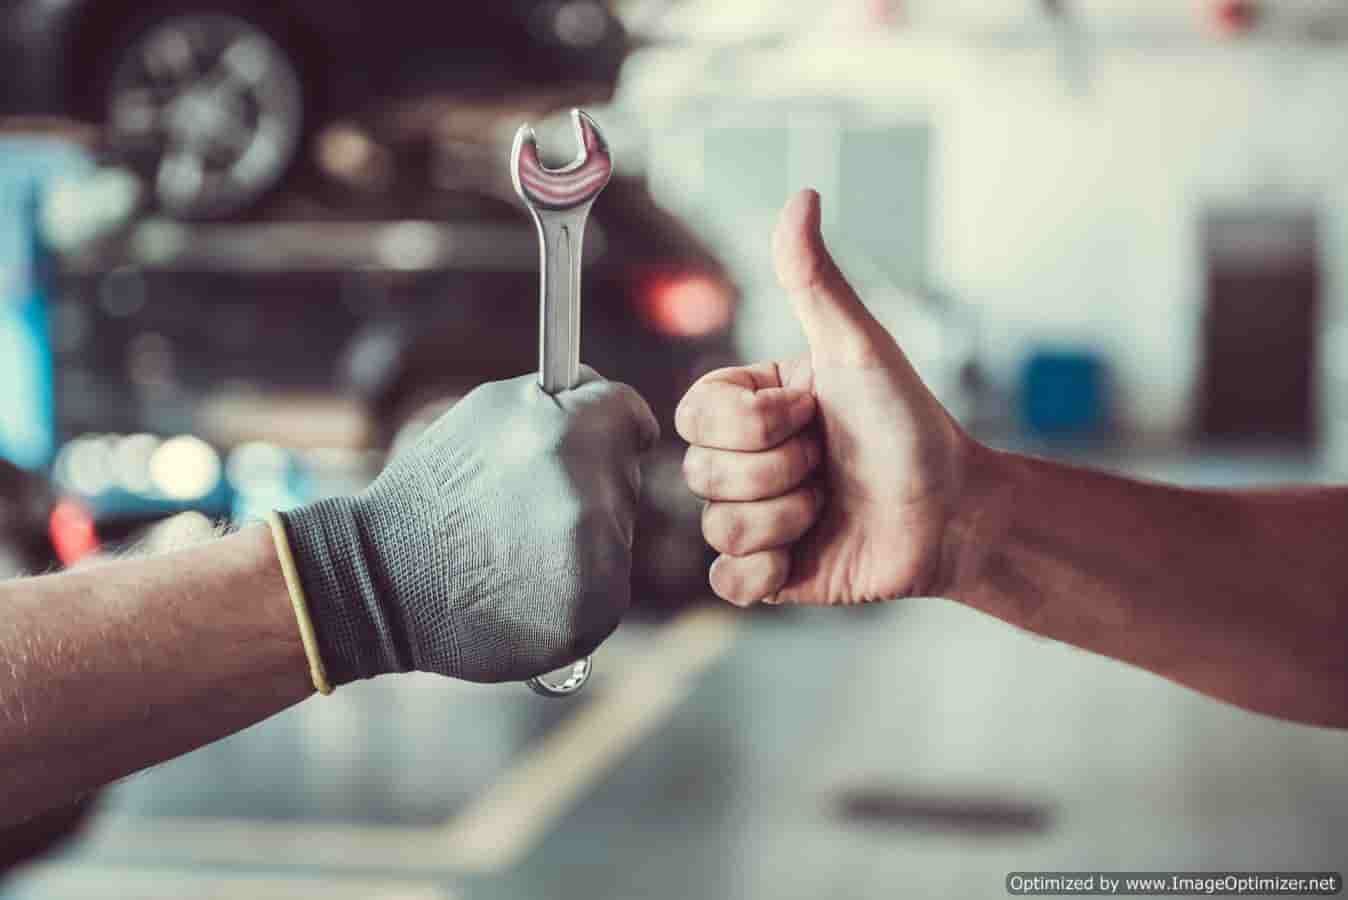 How Do You Choose The Right Auto Repair Shop